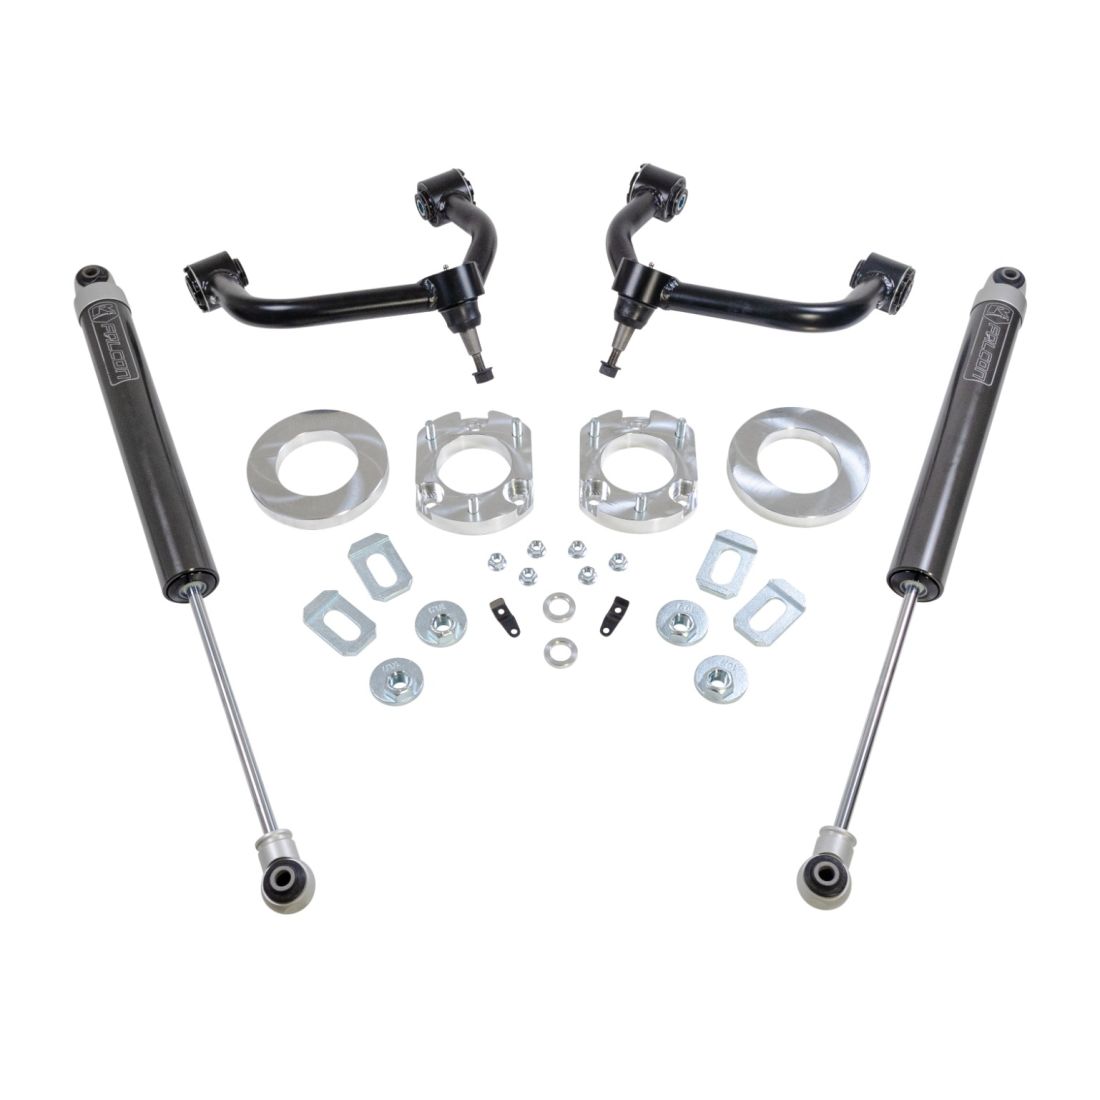 ReadyLIFT 3.5 Suspension Lifts for 21-23 Ford F-150, 69-21350-RL